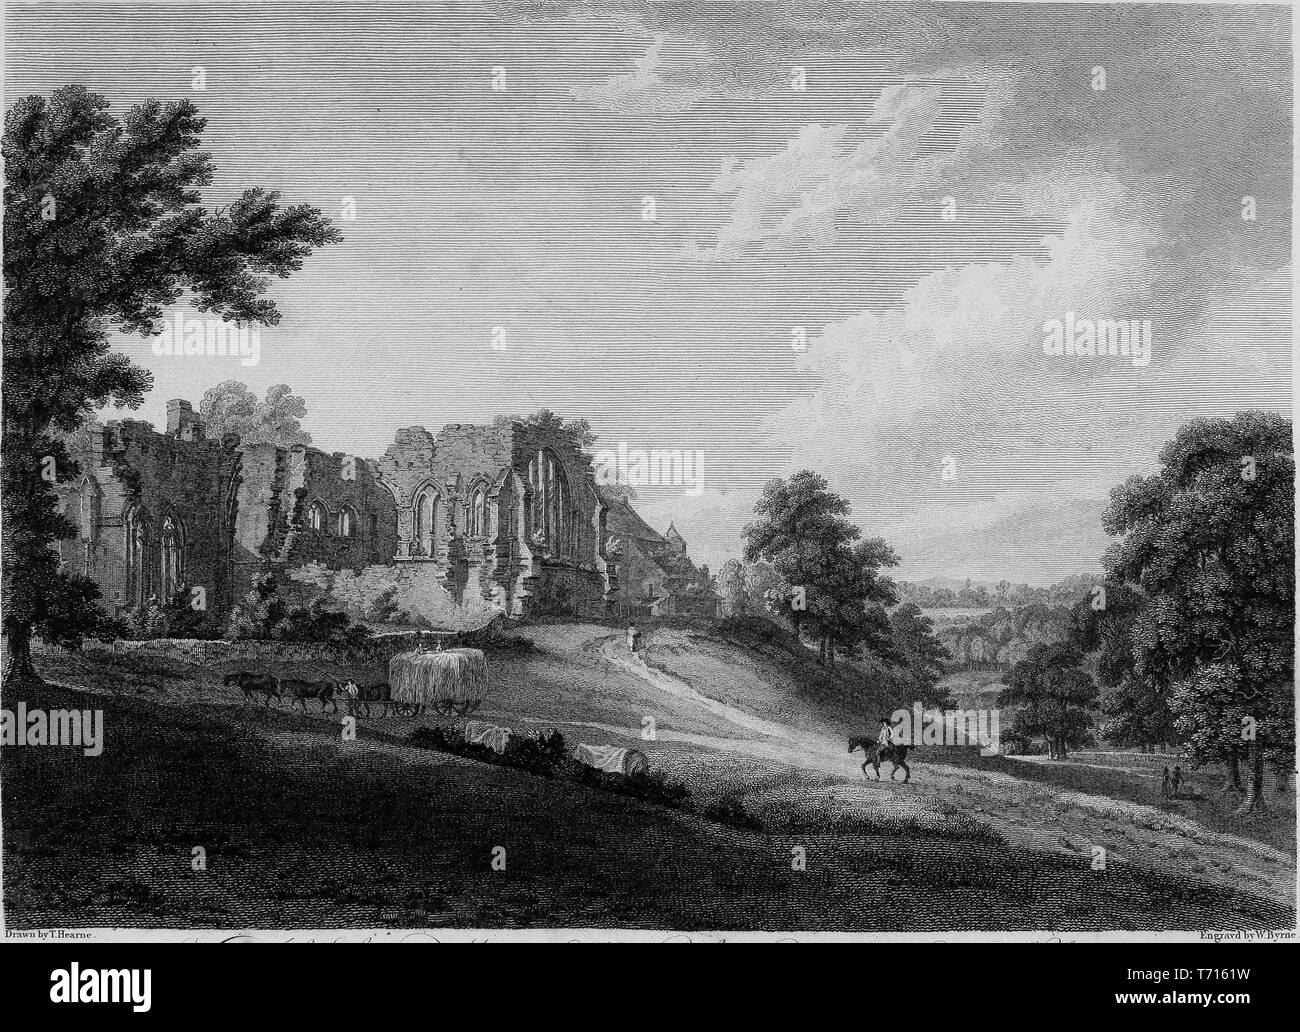 Engraving of the ruins of Eggleston Abbey in Durham, England, from the book 'Antiquities of Great Britain' by William Byrne and Thomas Hearne, 1825. Courtesy Internet Archive. () Stock Photo